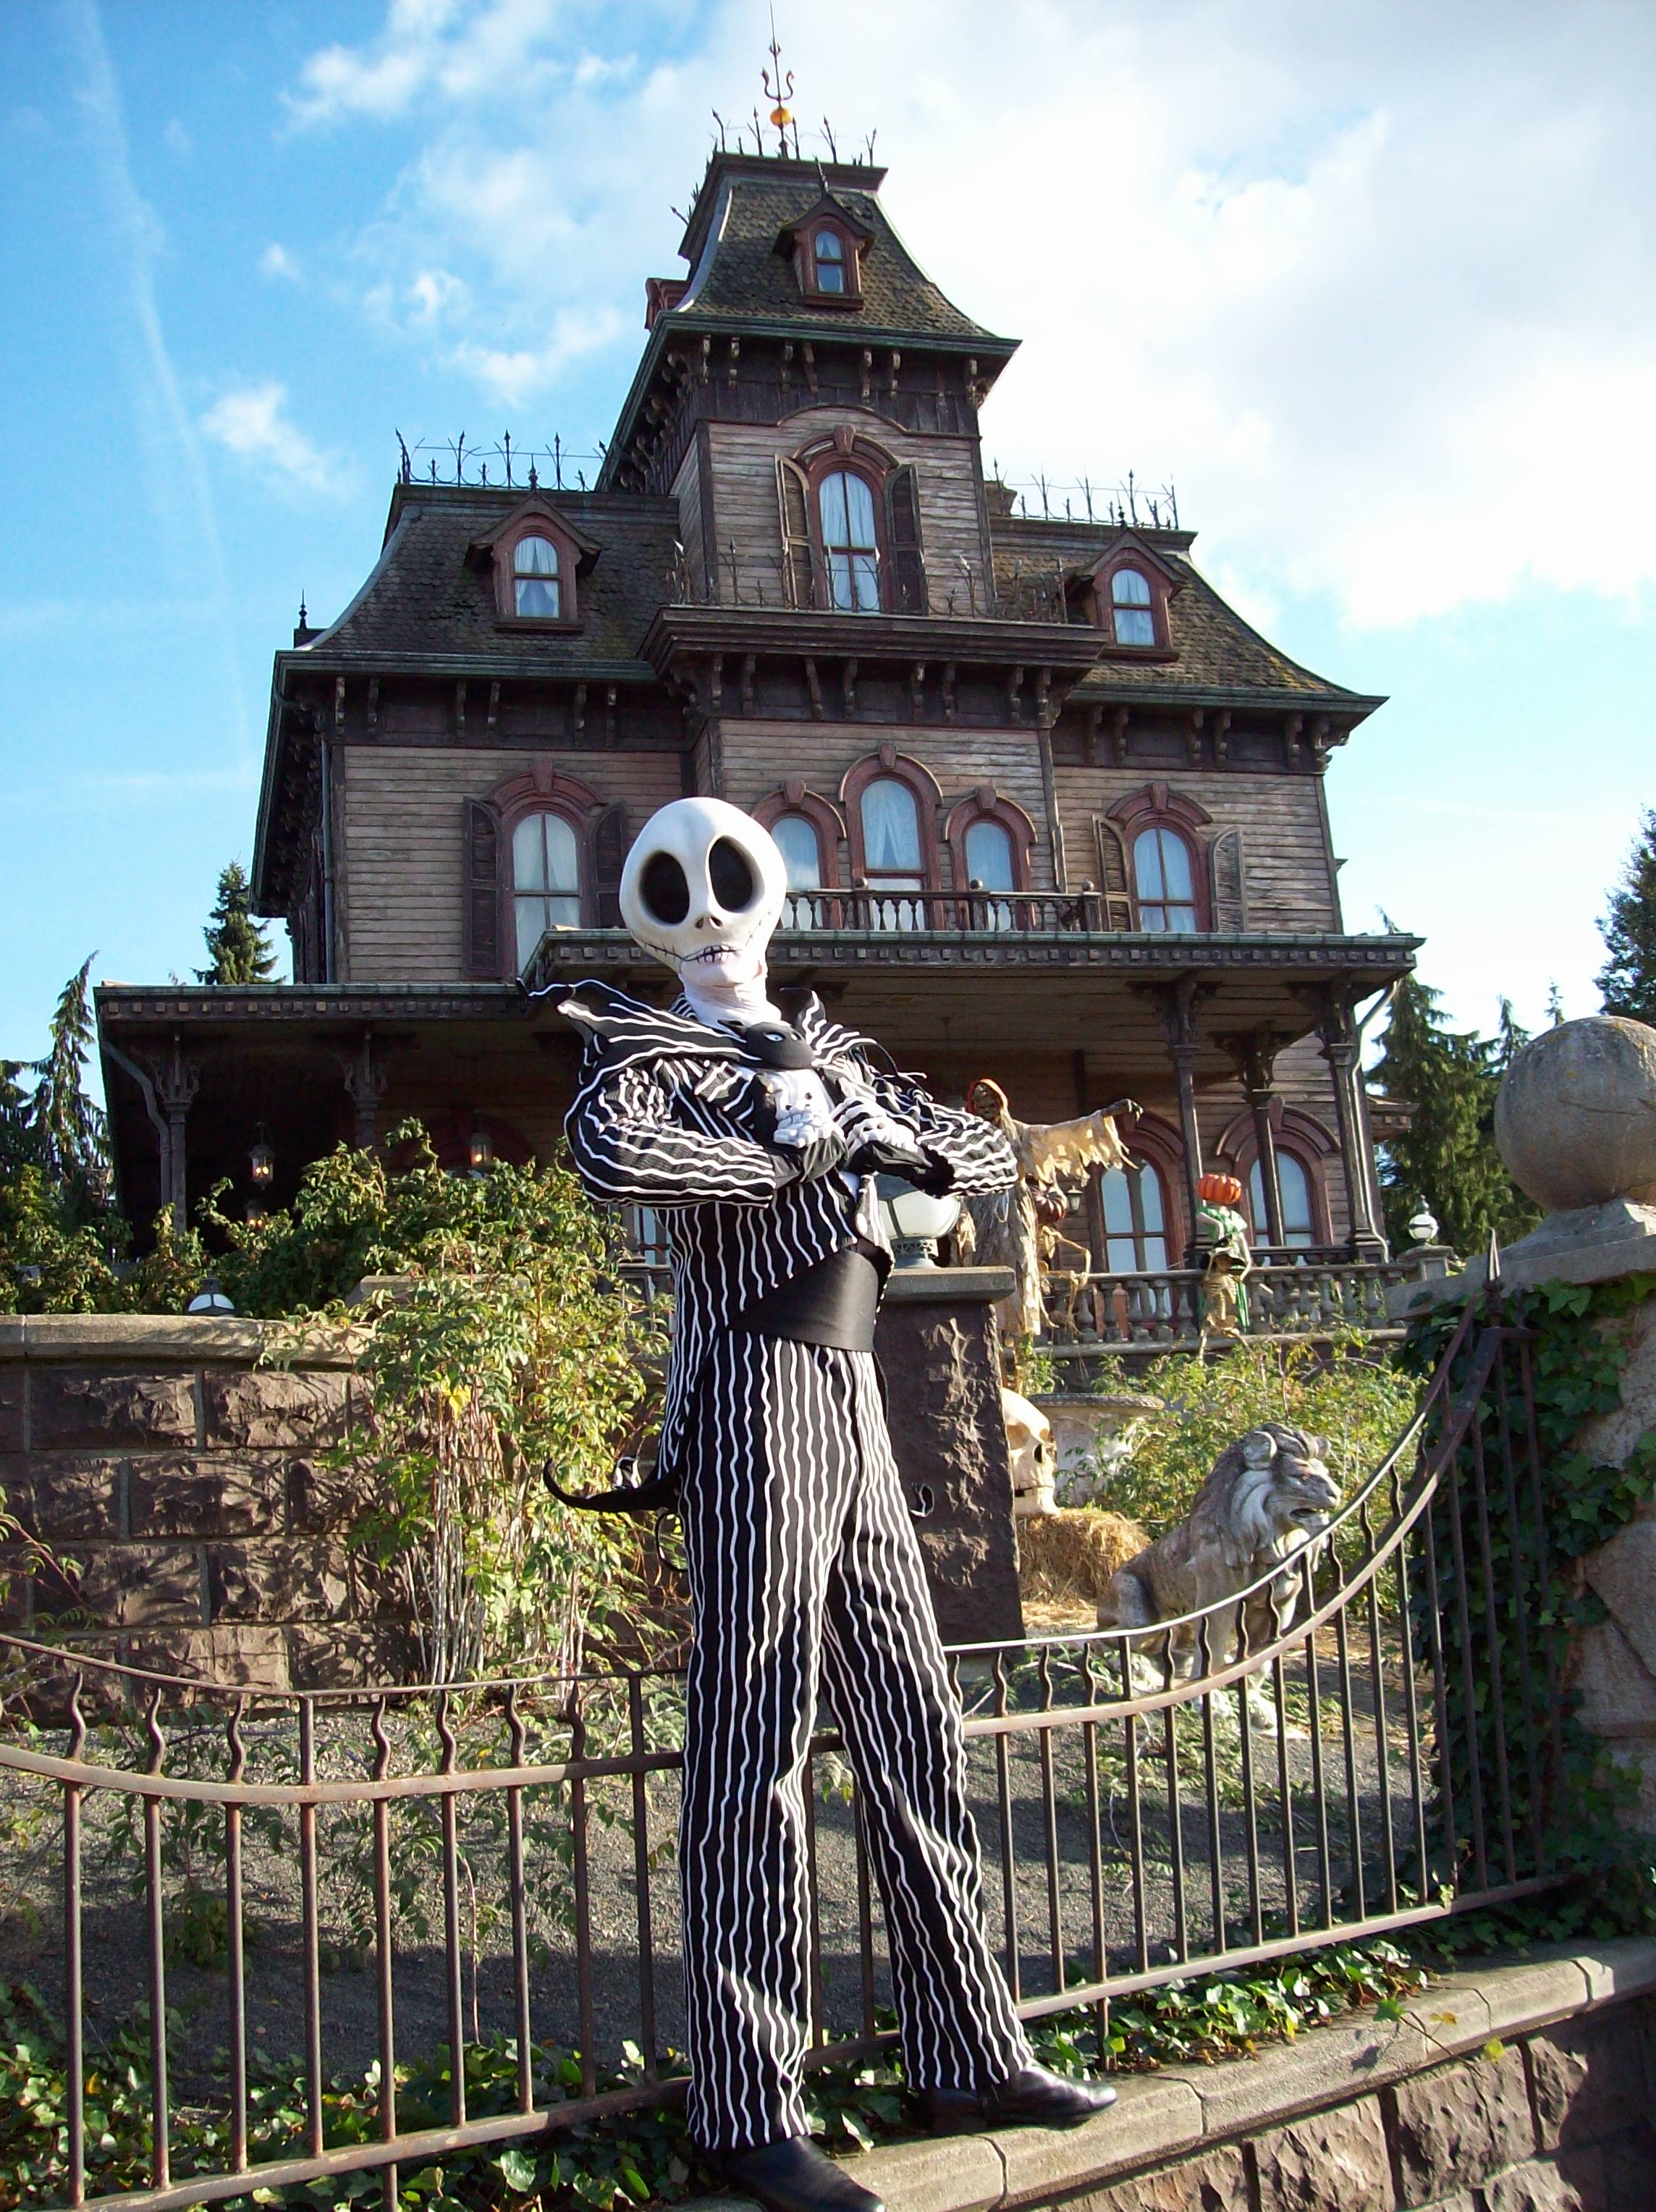 Jack does Meet'n'Greets during the Halloween Season and for the first time during the Christmas Season in 2012